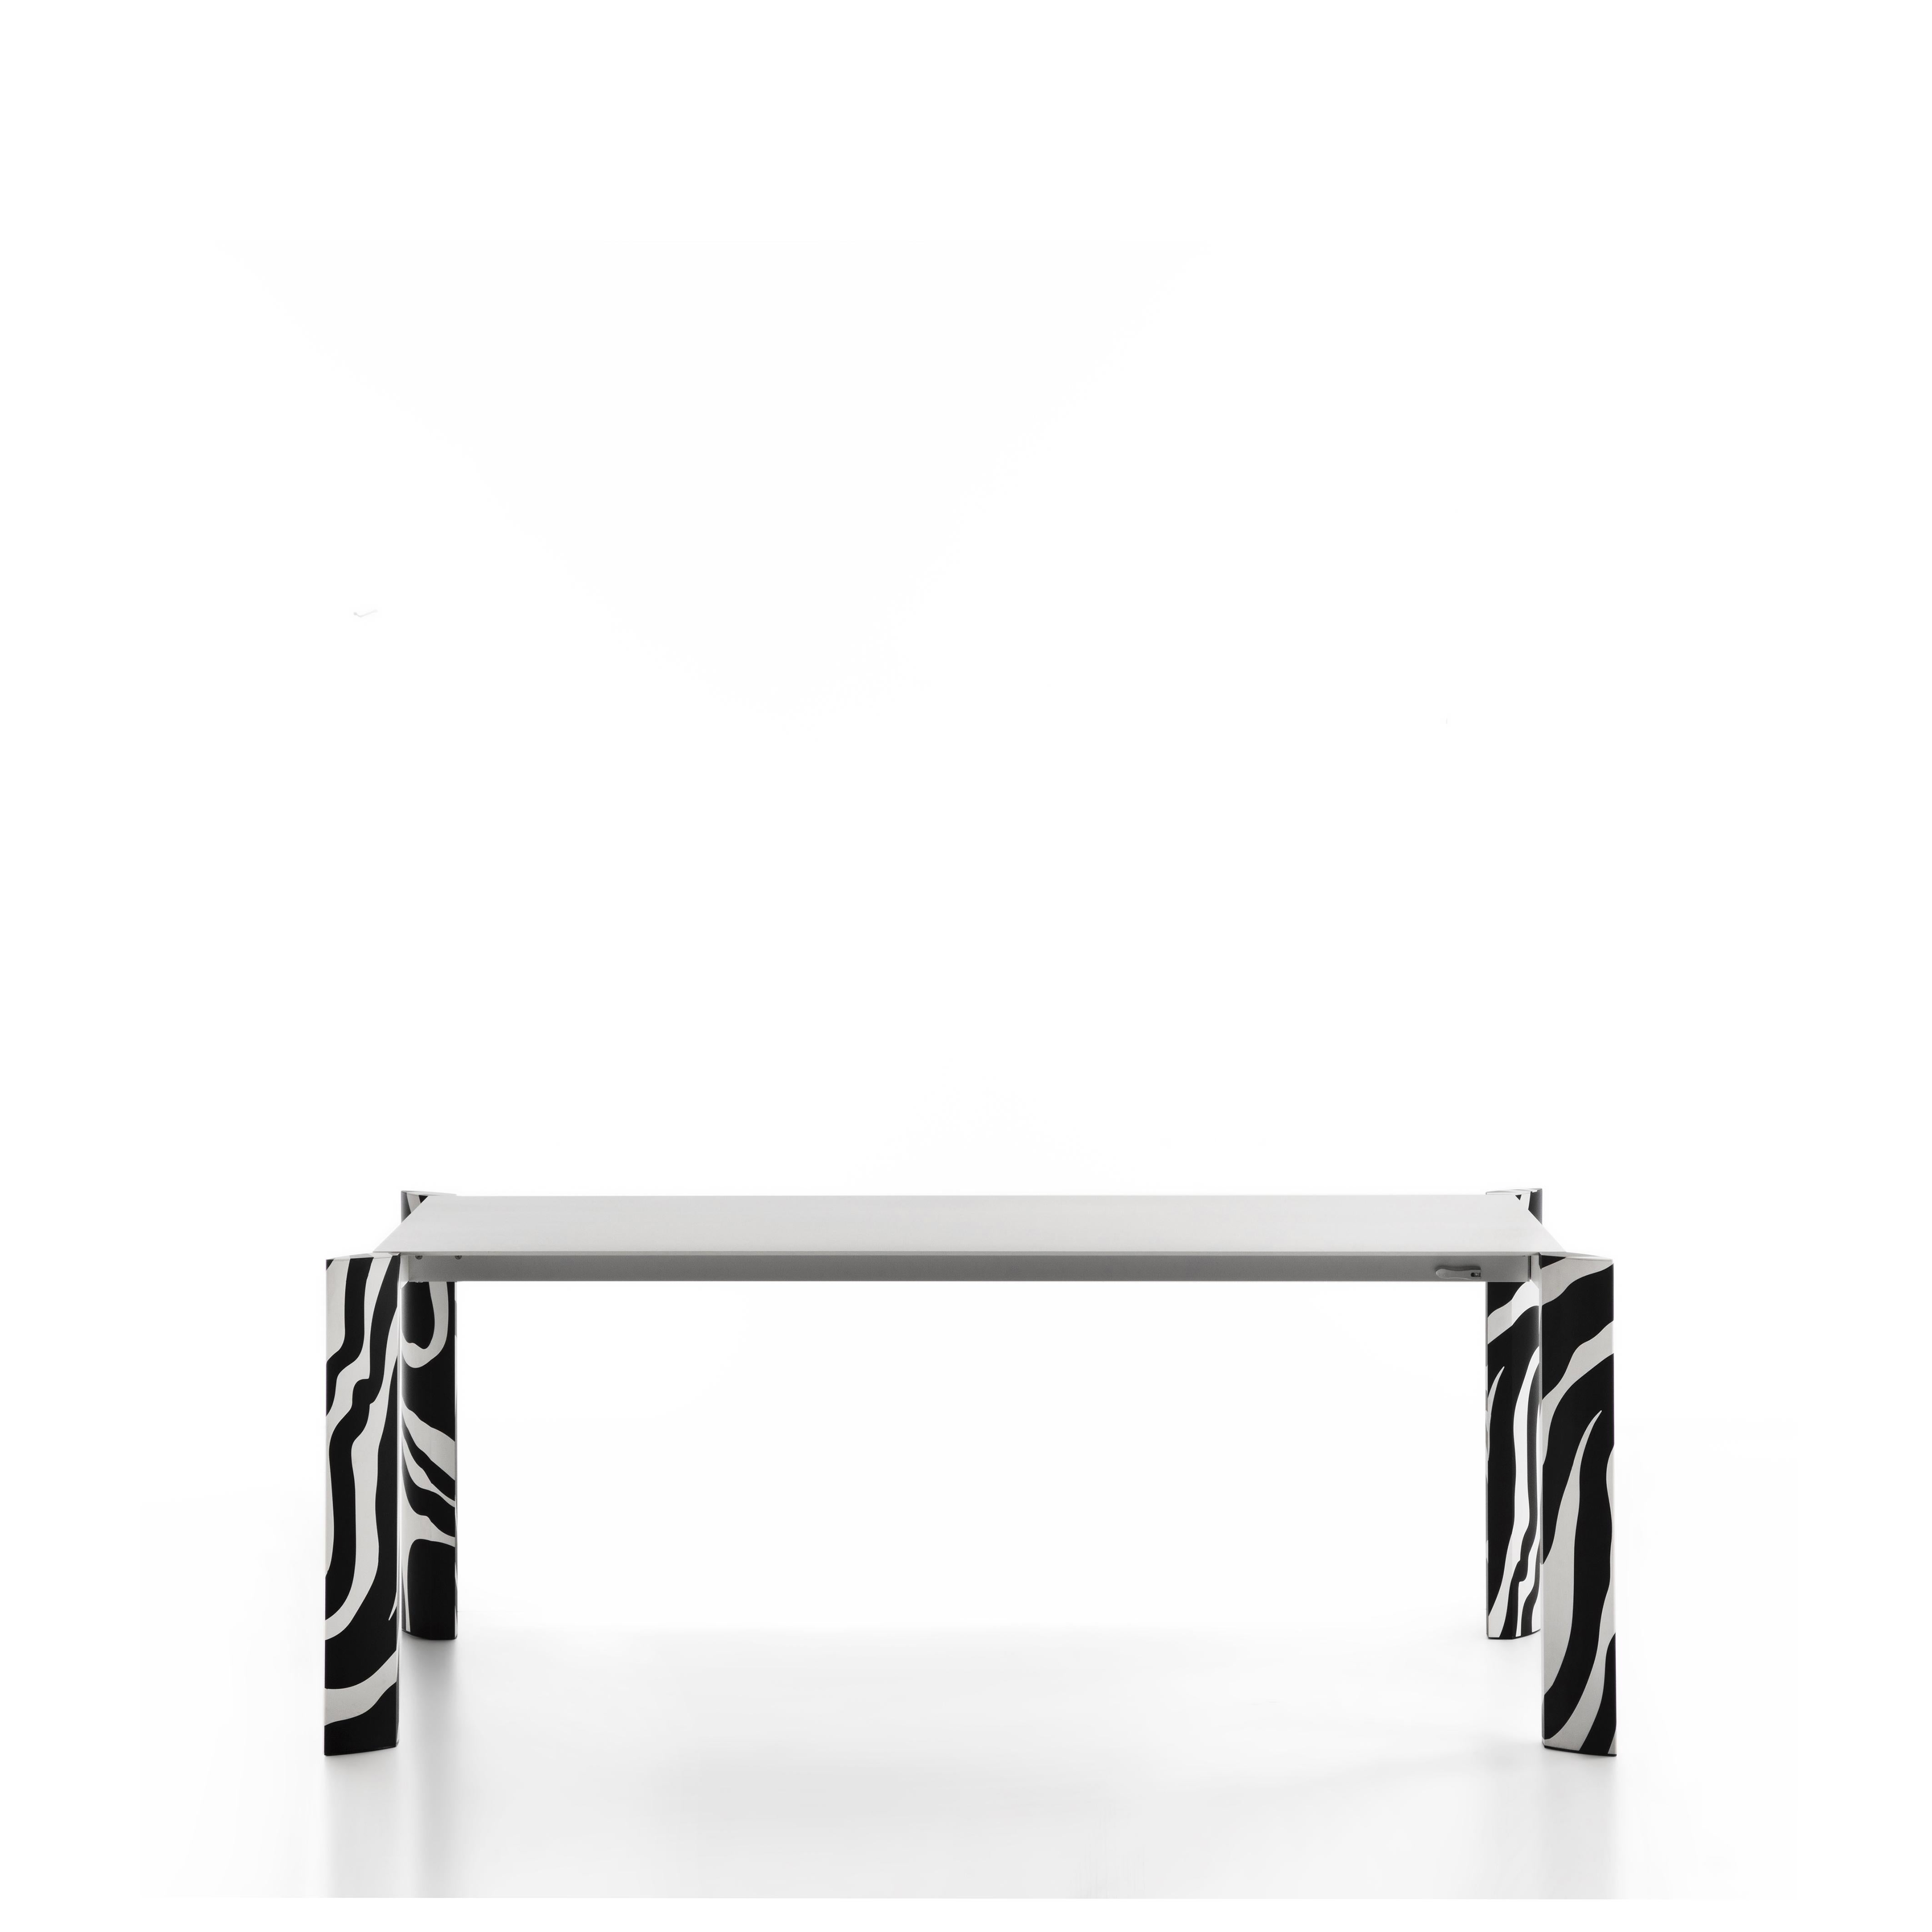 Metaverso table

Distinguished by four extraordinarily patterned legs covered with printed corn paper, this dining table exudes the utmost style and originality. Entirely fashioned of recycled aluminum, it features an extendible top that opens up